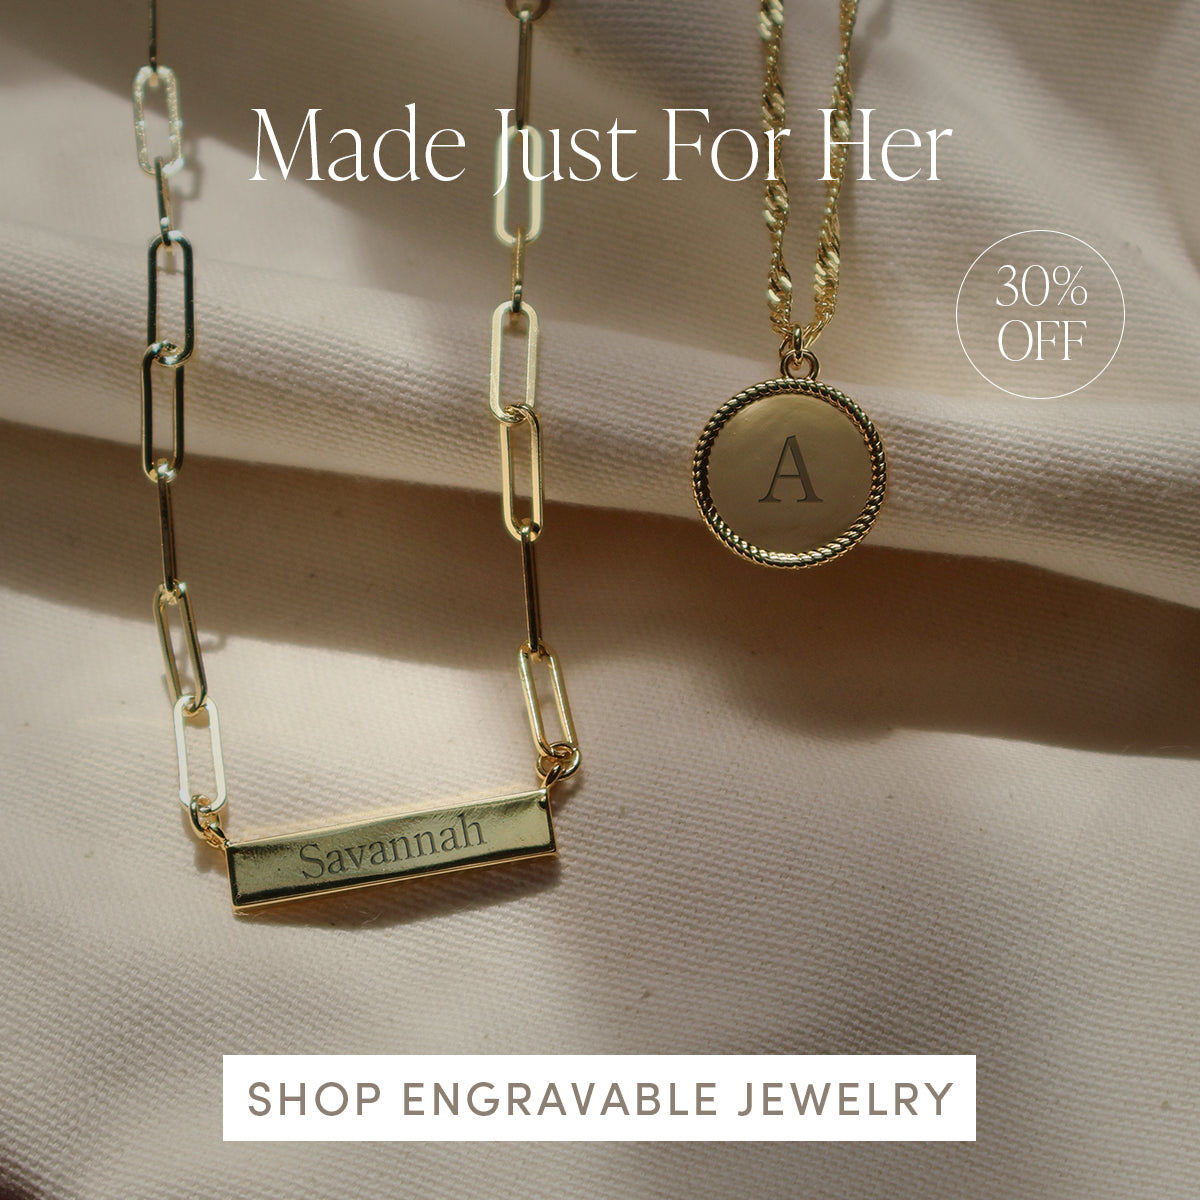 Made Just For Her | 30% Off | Shop Engravable Jewelry | Uncommon James